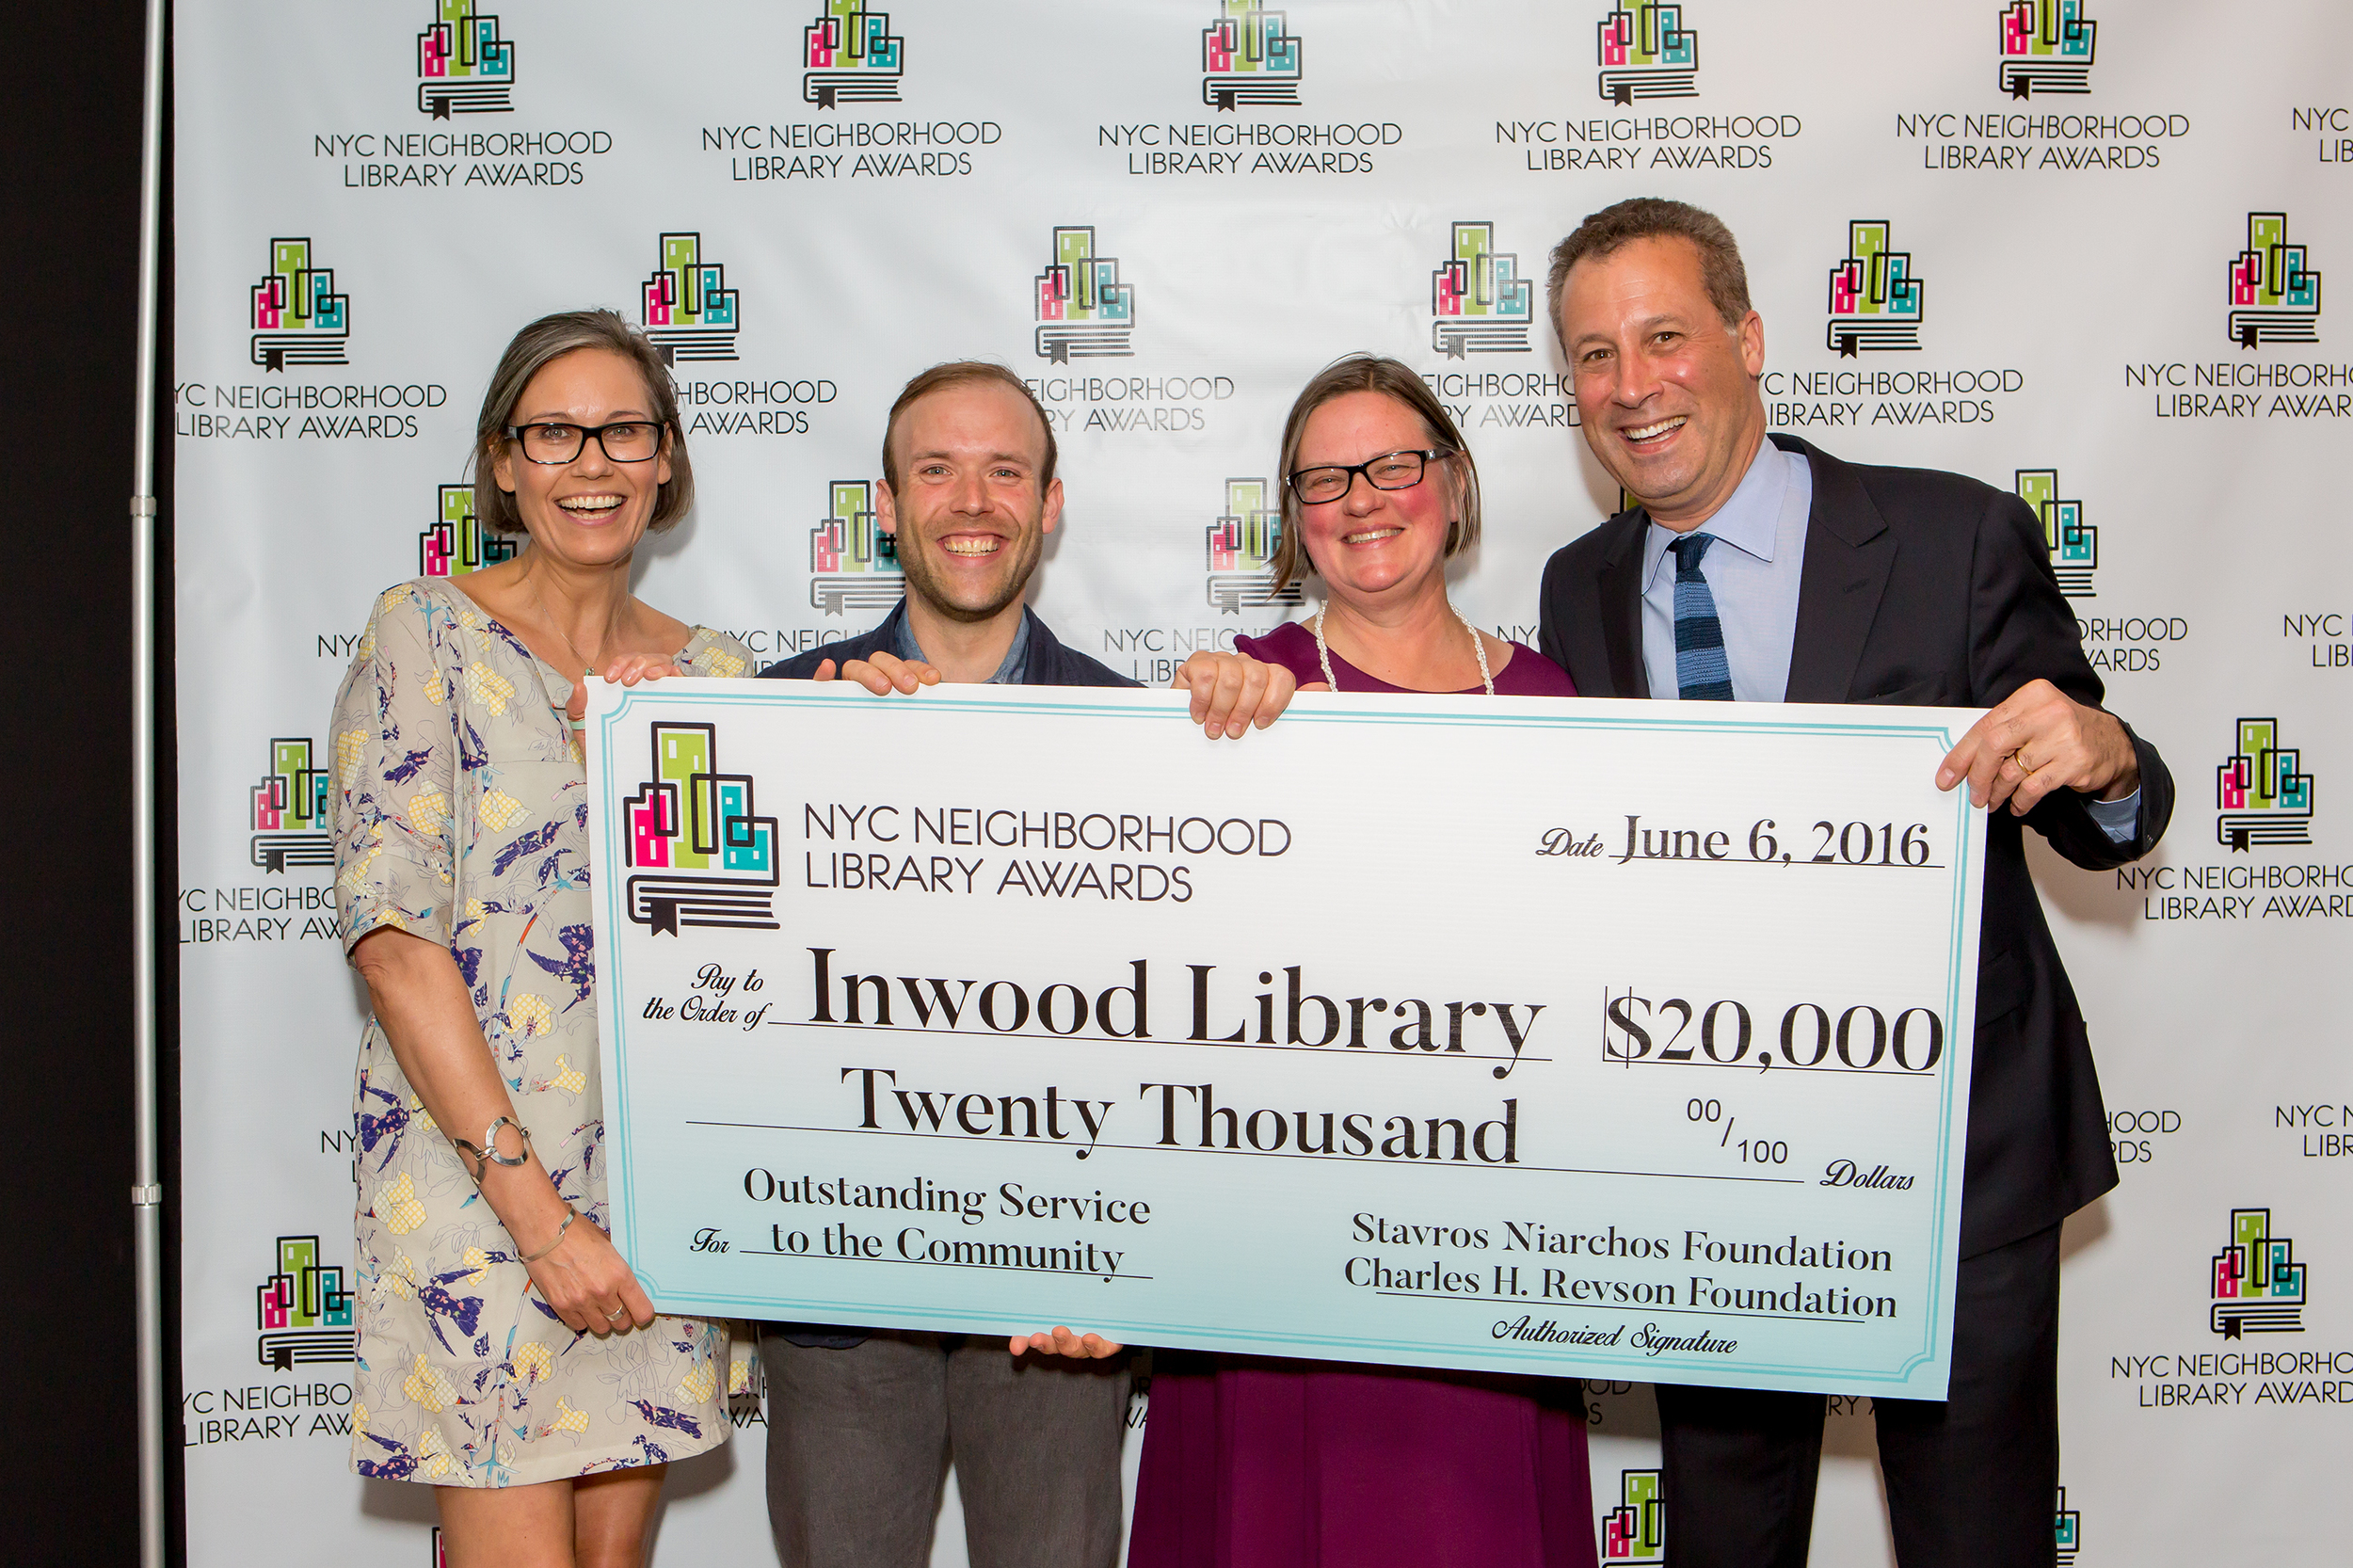 Staff Members of the Inwood Library and Tony Marx, President and CEO of the New York Public Library